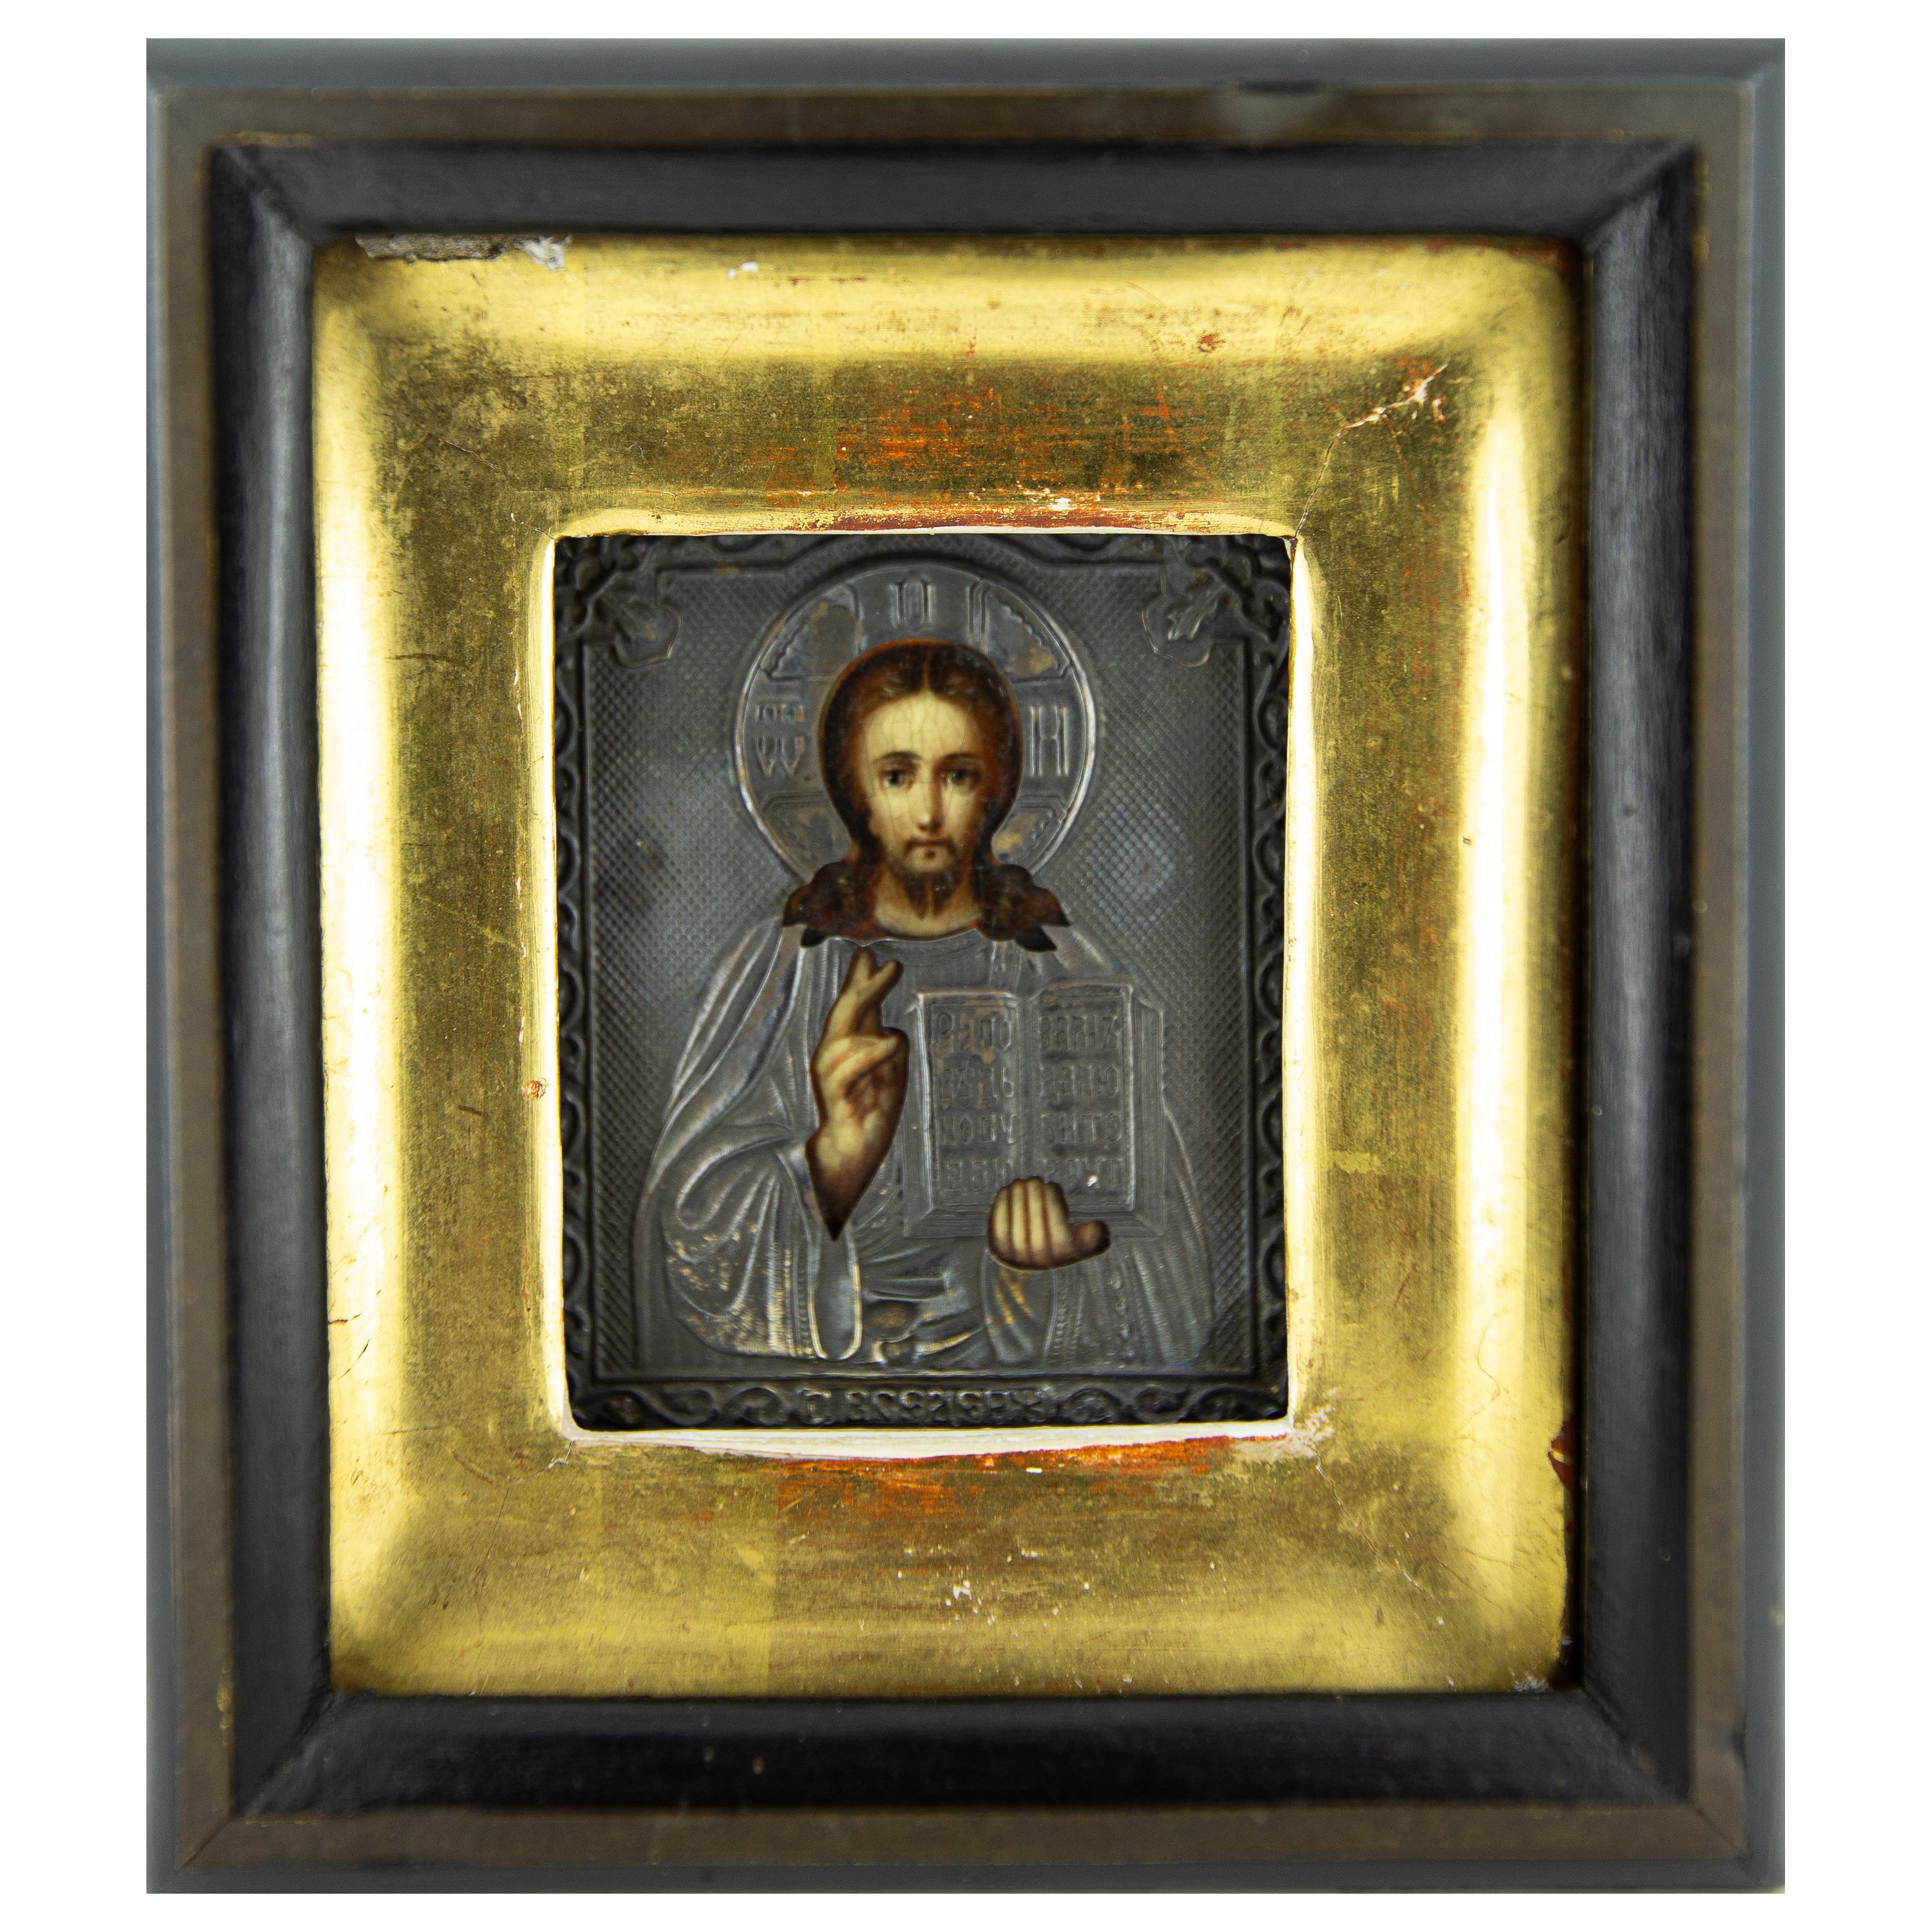 Antique 1901 Russian Silver Icon, framed, signed "A.G.", A. Golovin 